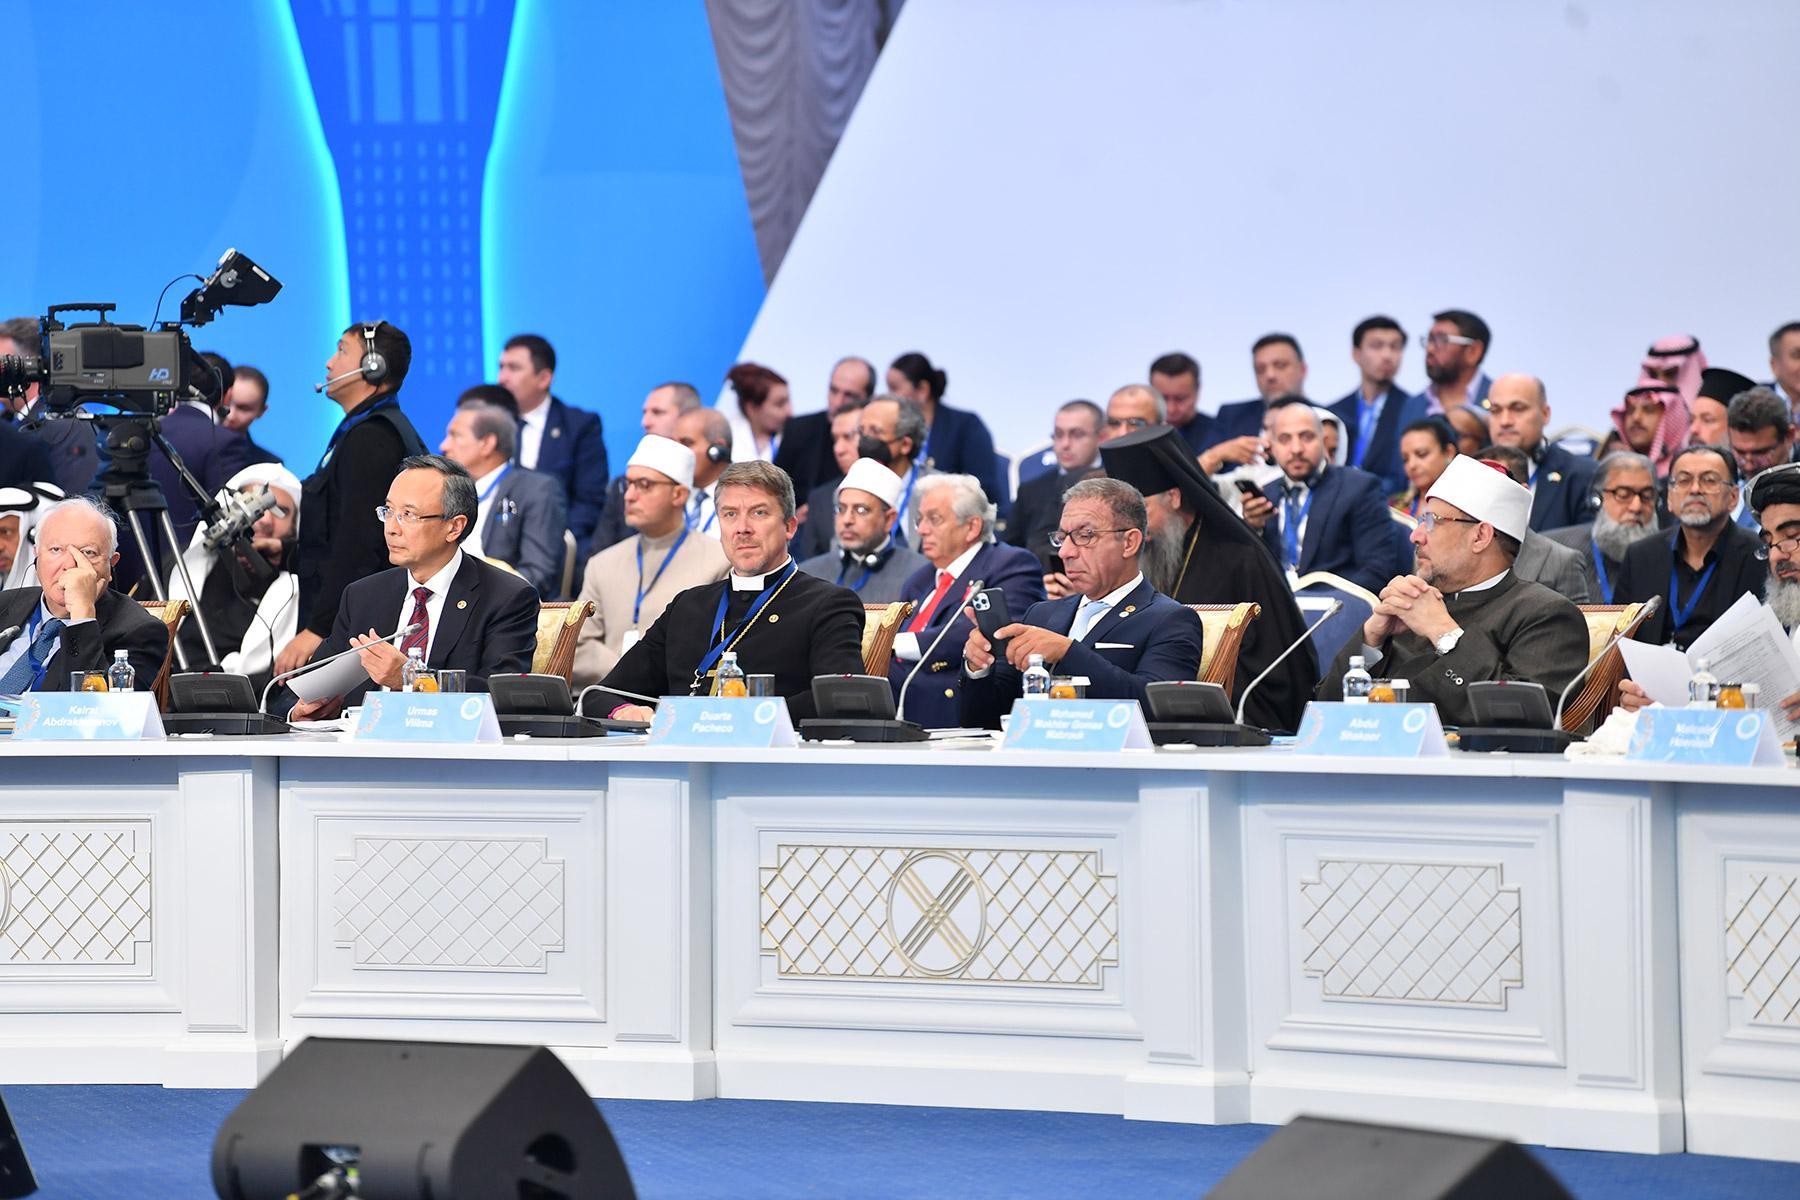 LWF Vice-President Viilma represented the LWF at the 7th congress of world and traditional religious leaders in Kazakhstan.